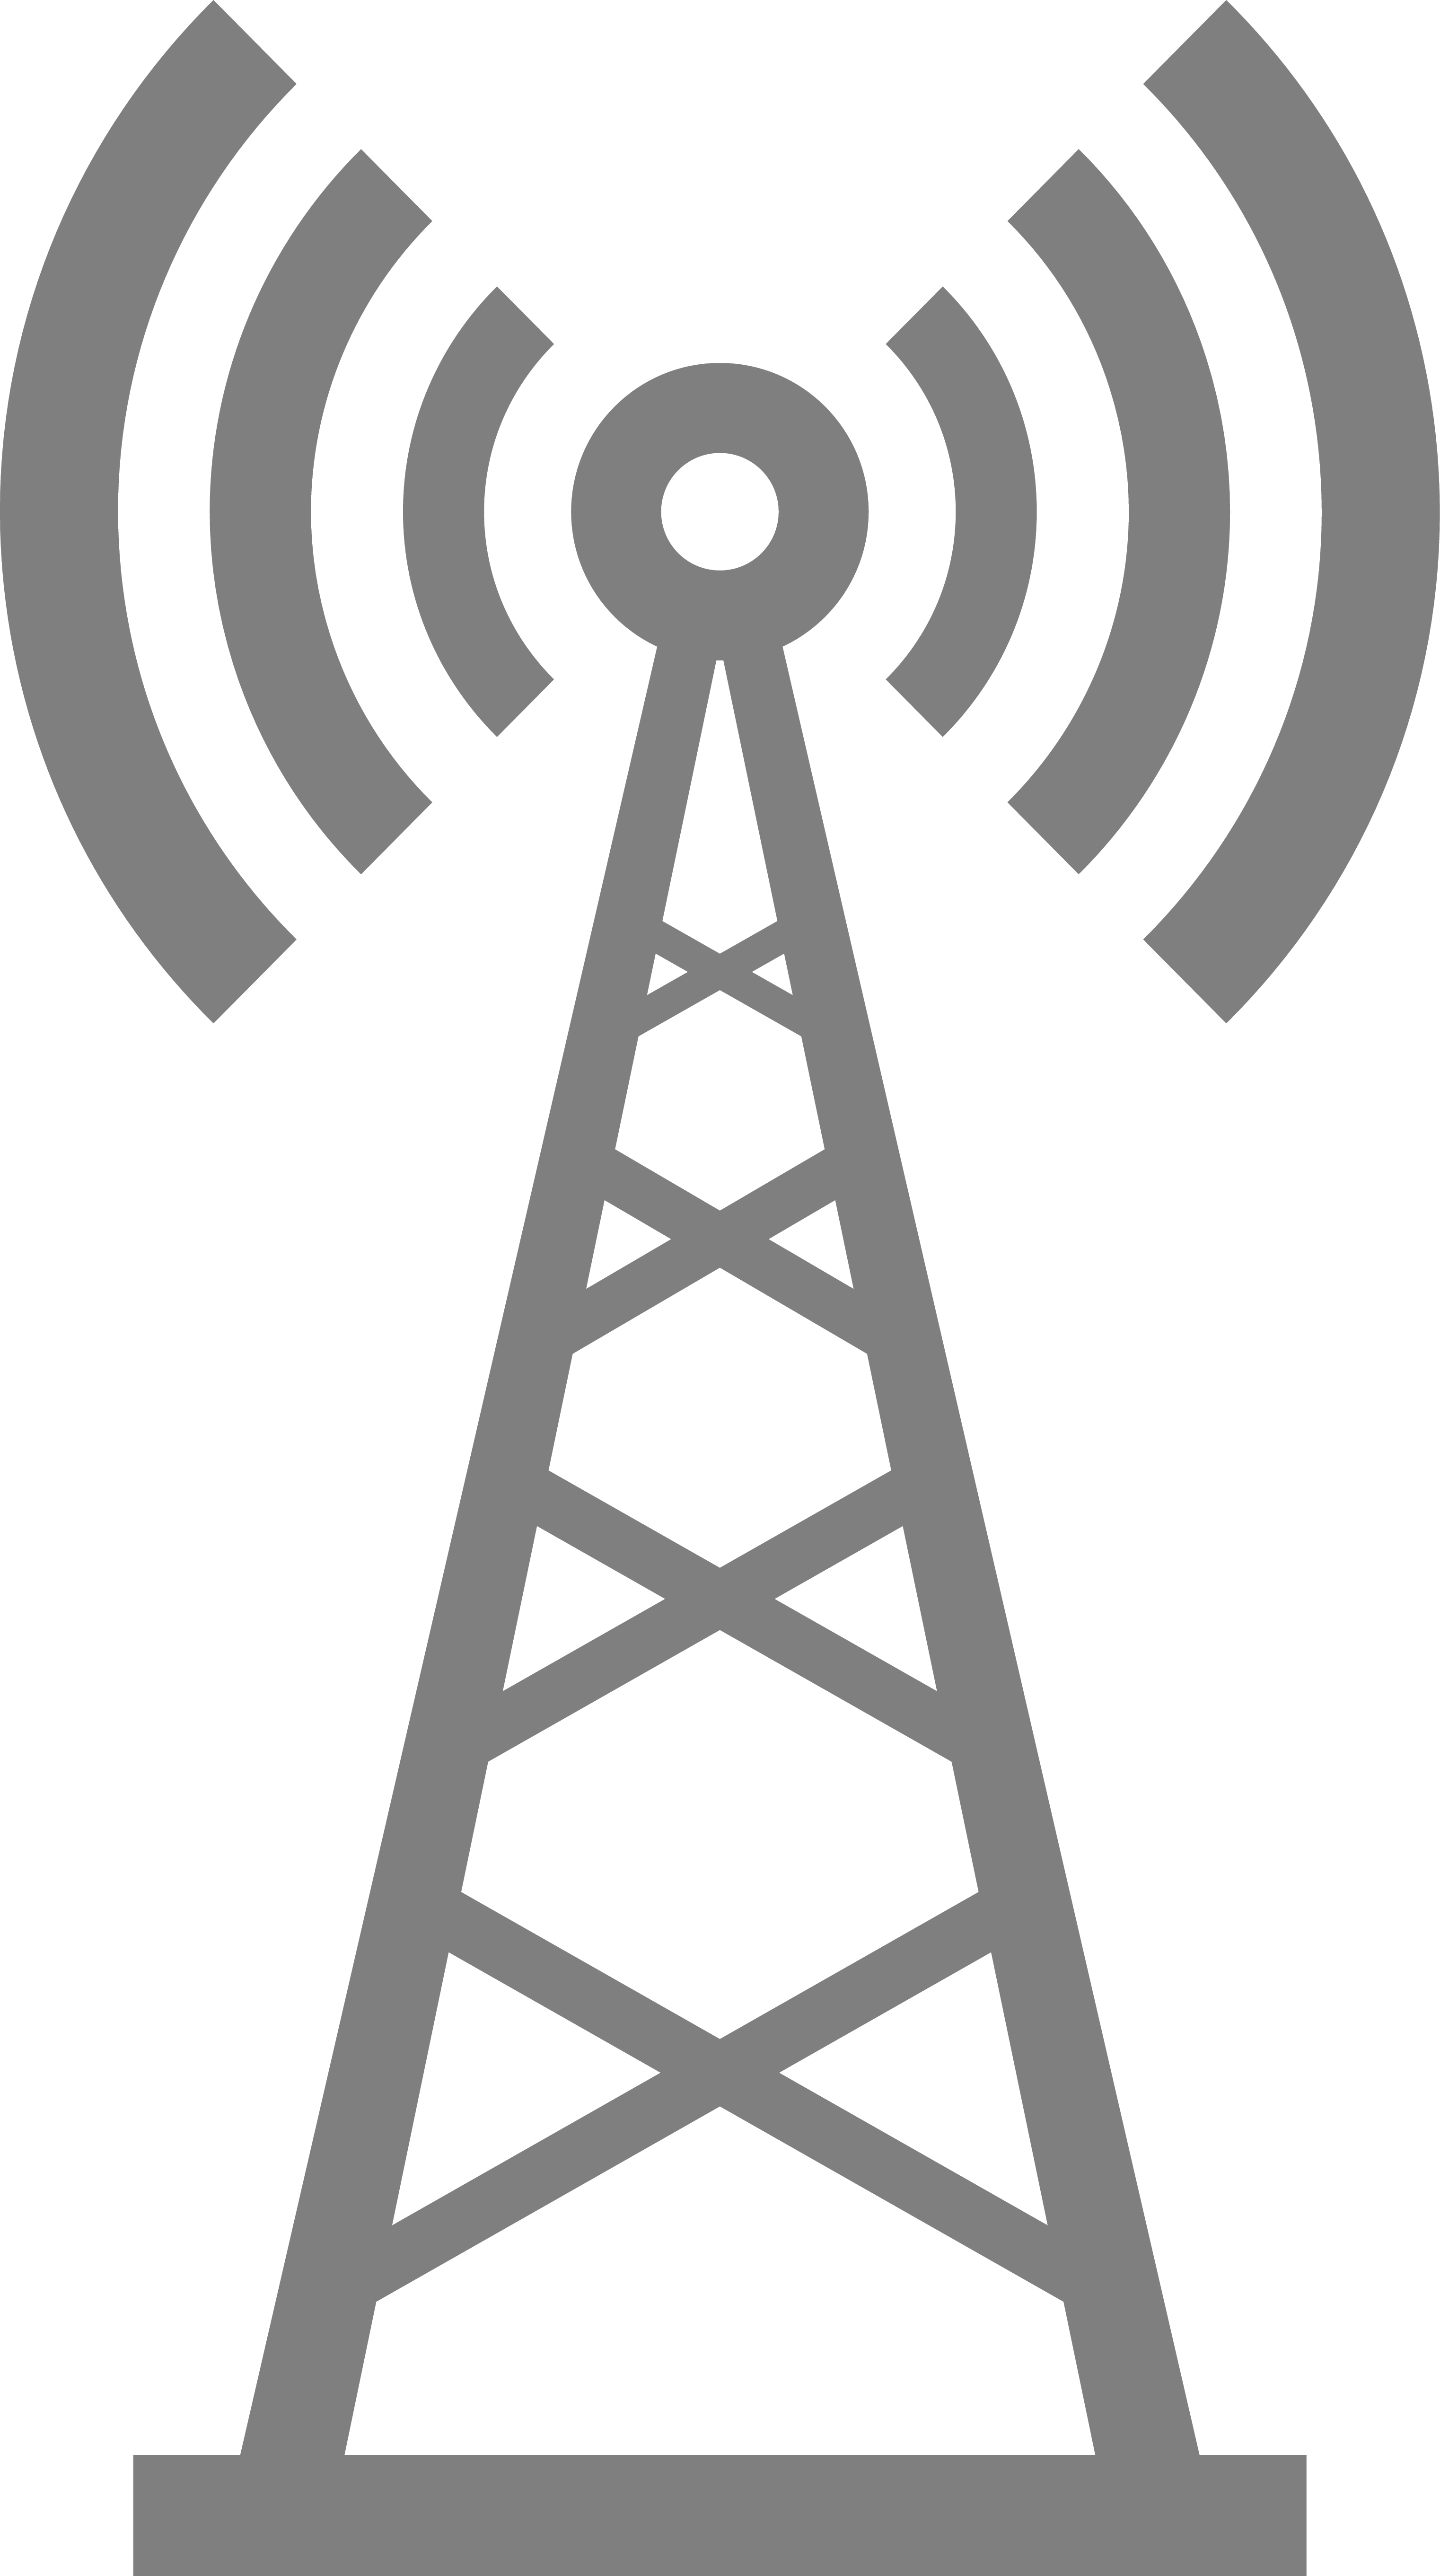 Radio Tower Graphic – The Golf Shop Show